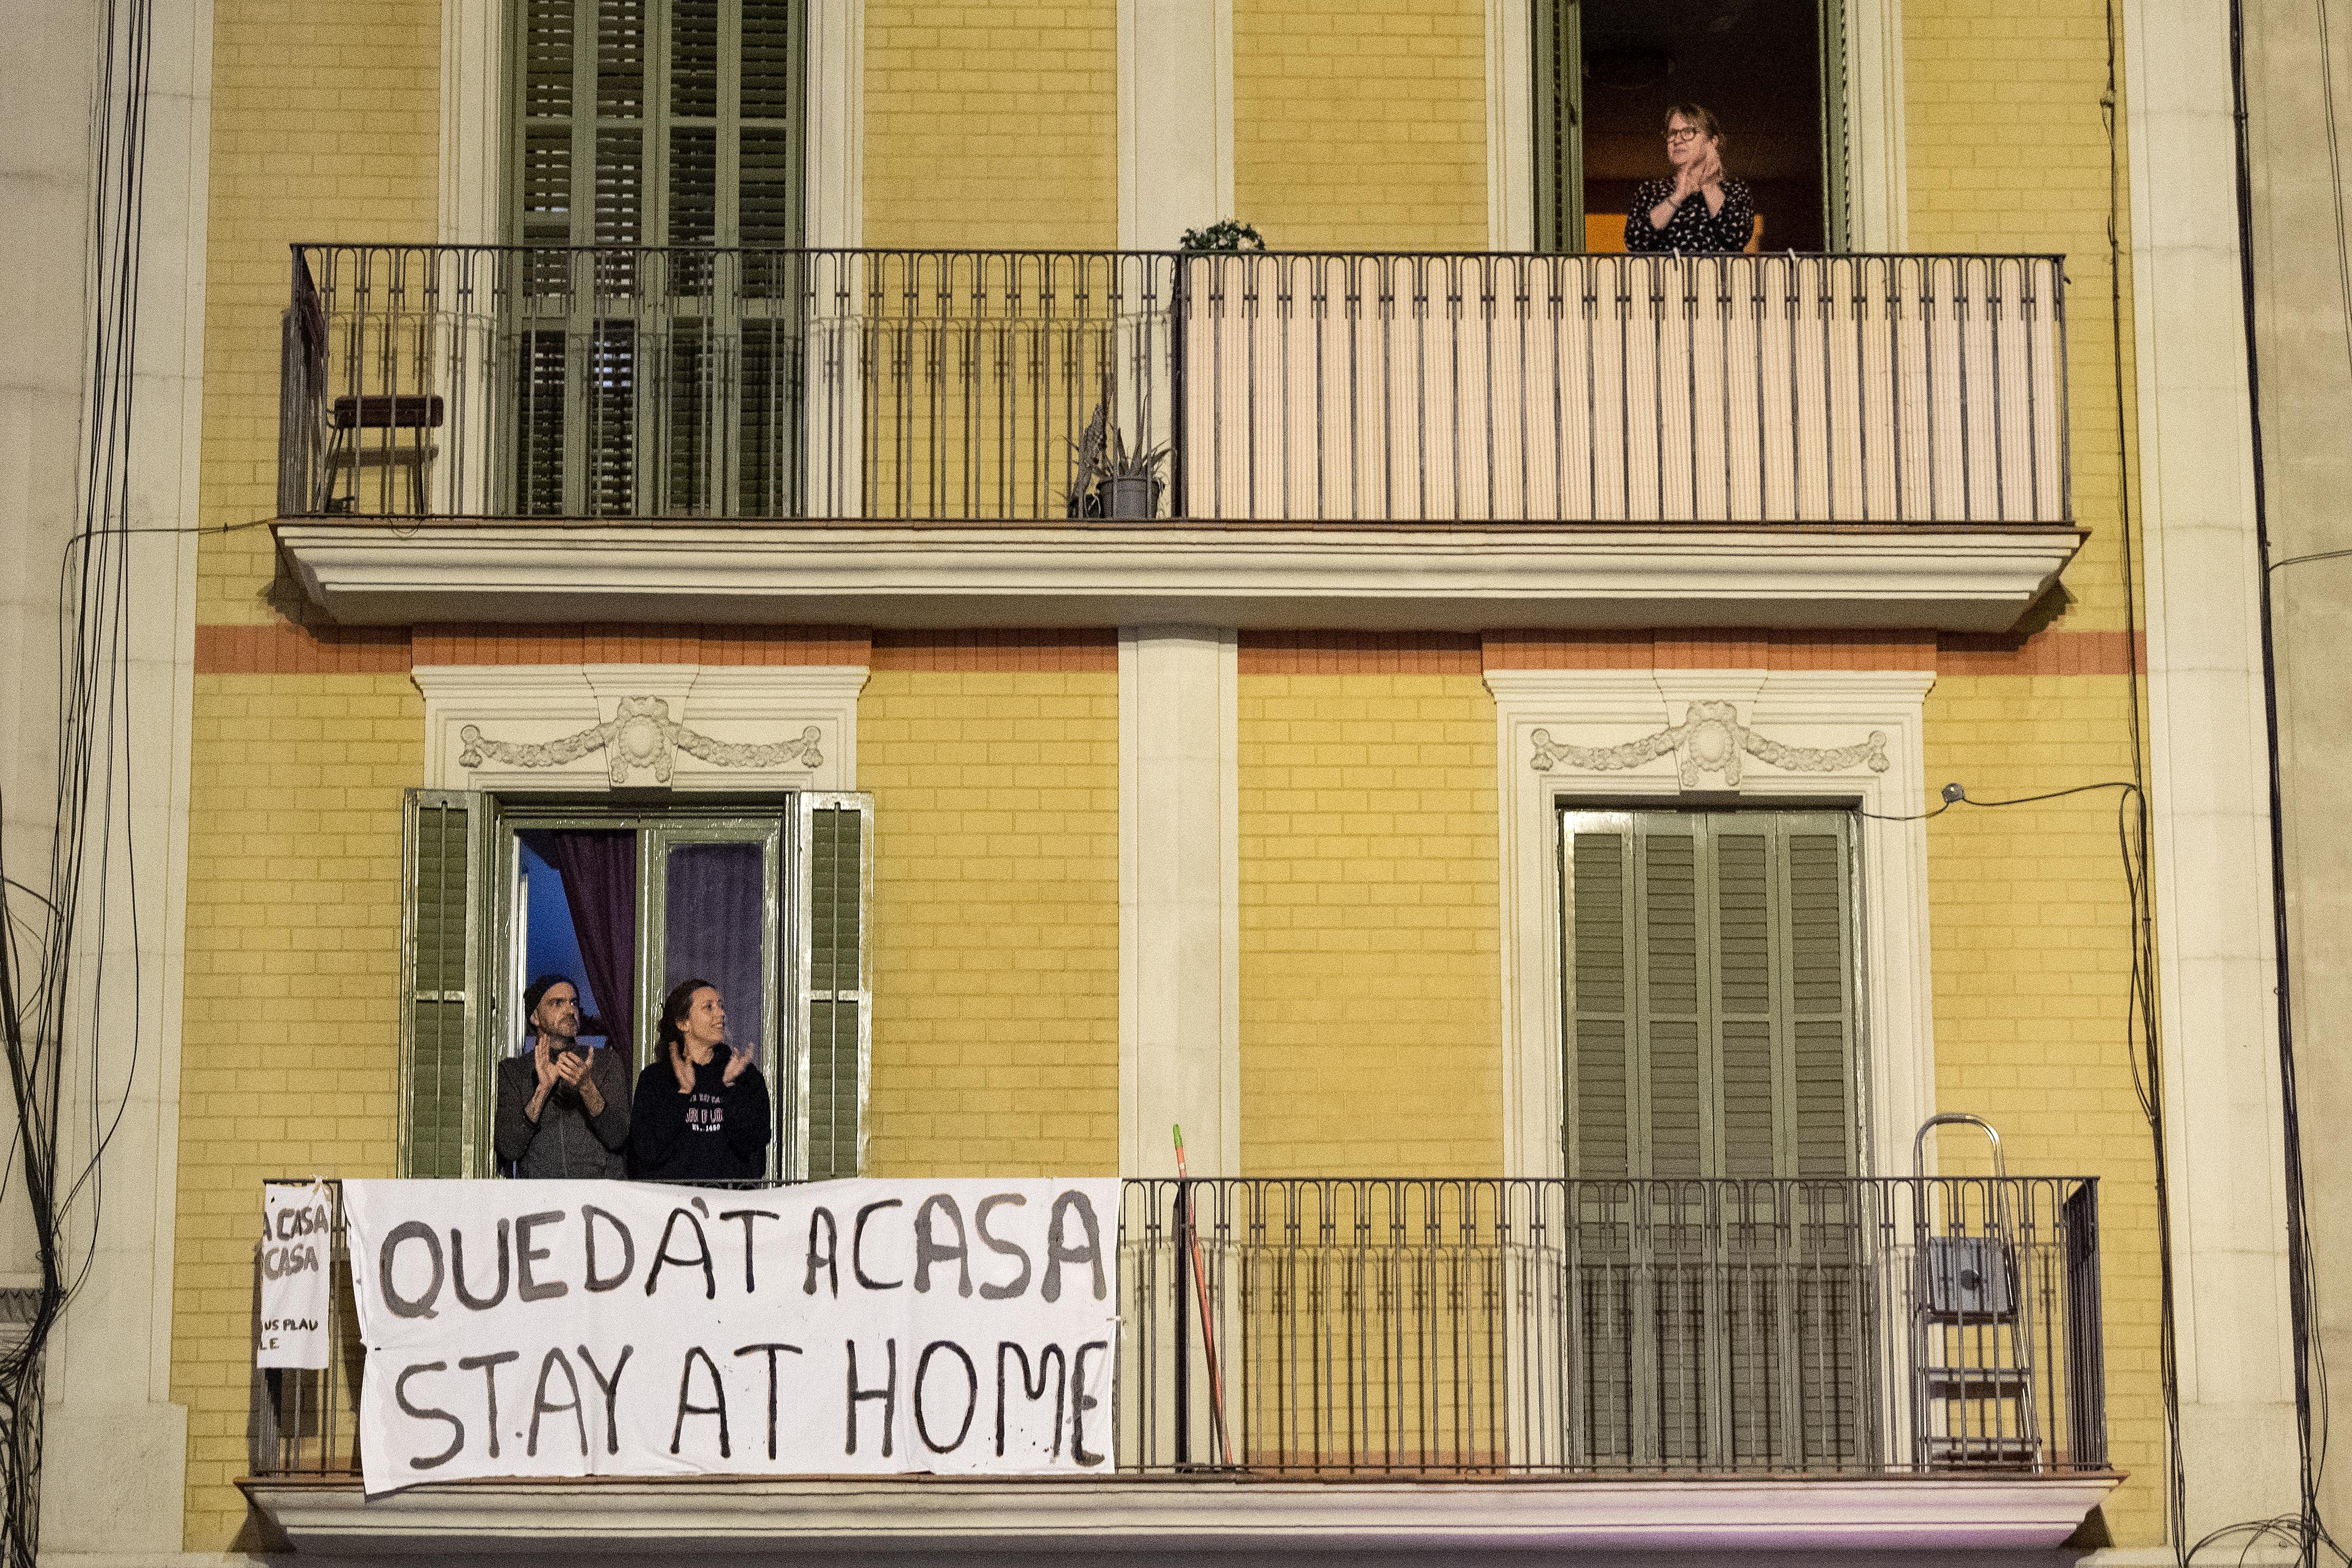 people on a balcony with a sign that says "stay home"